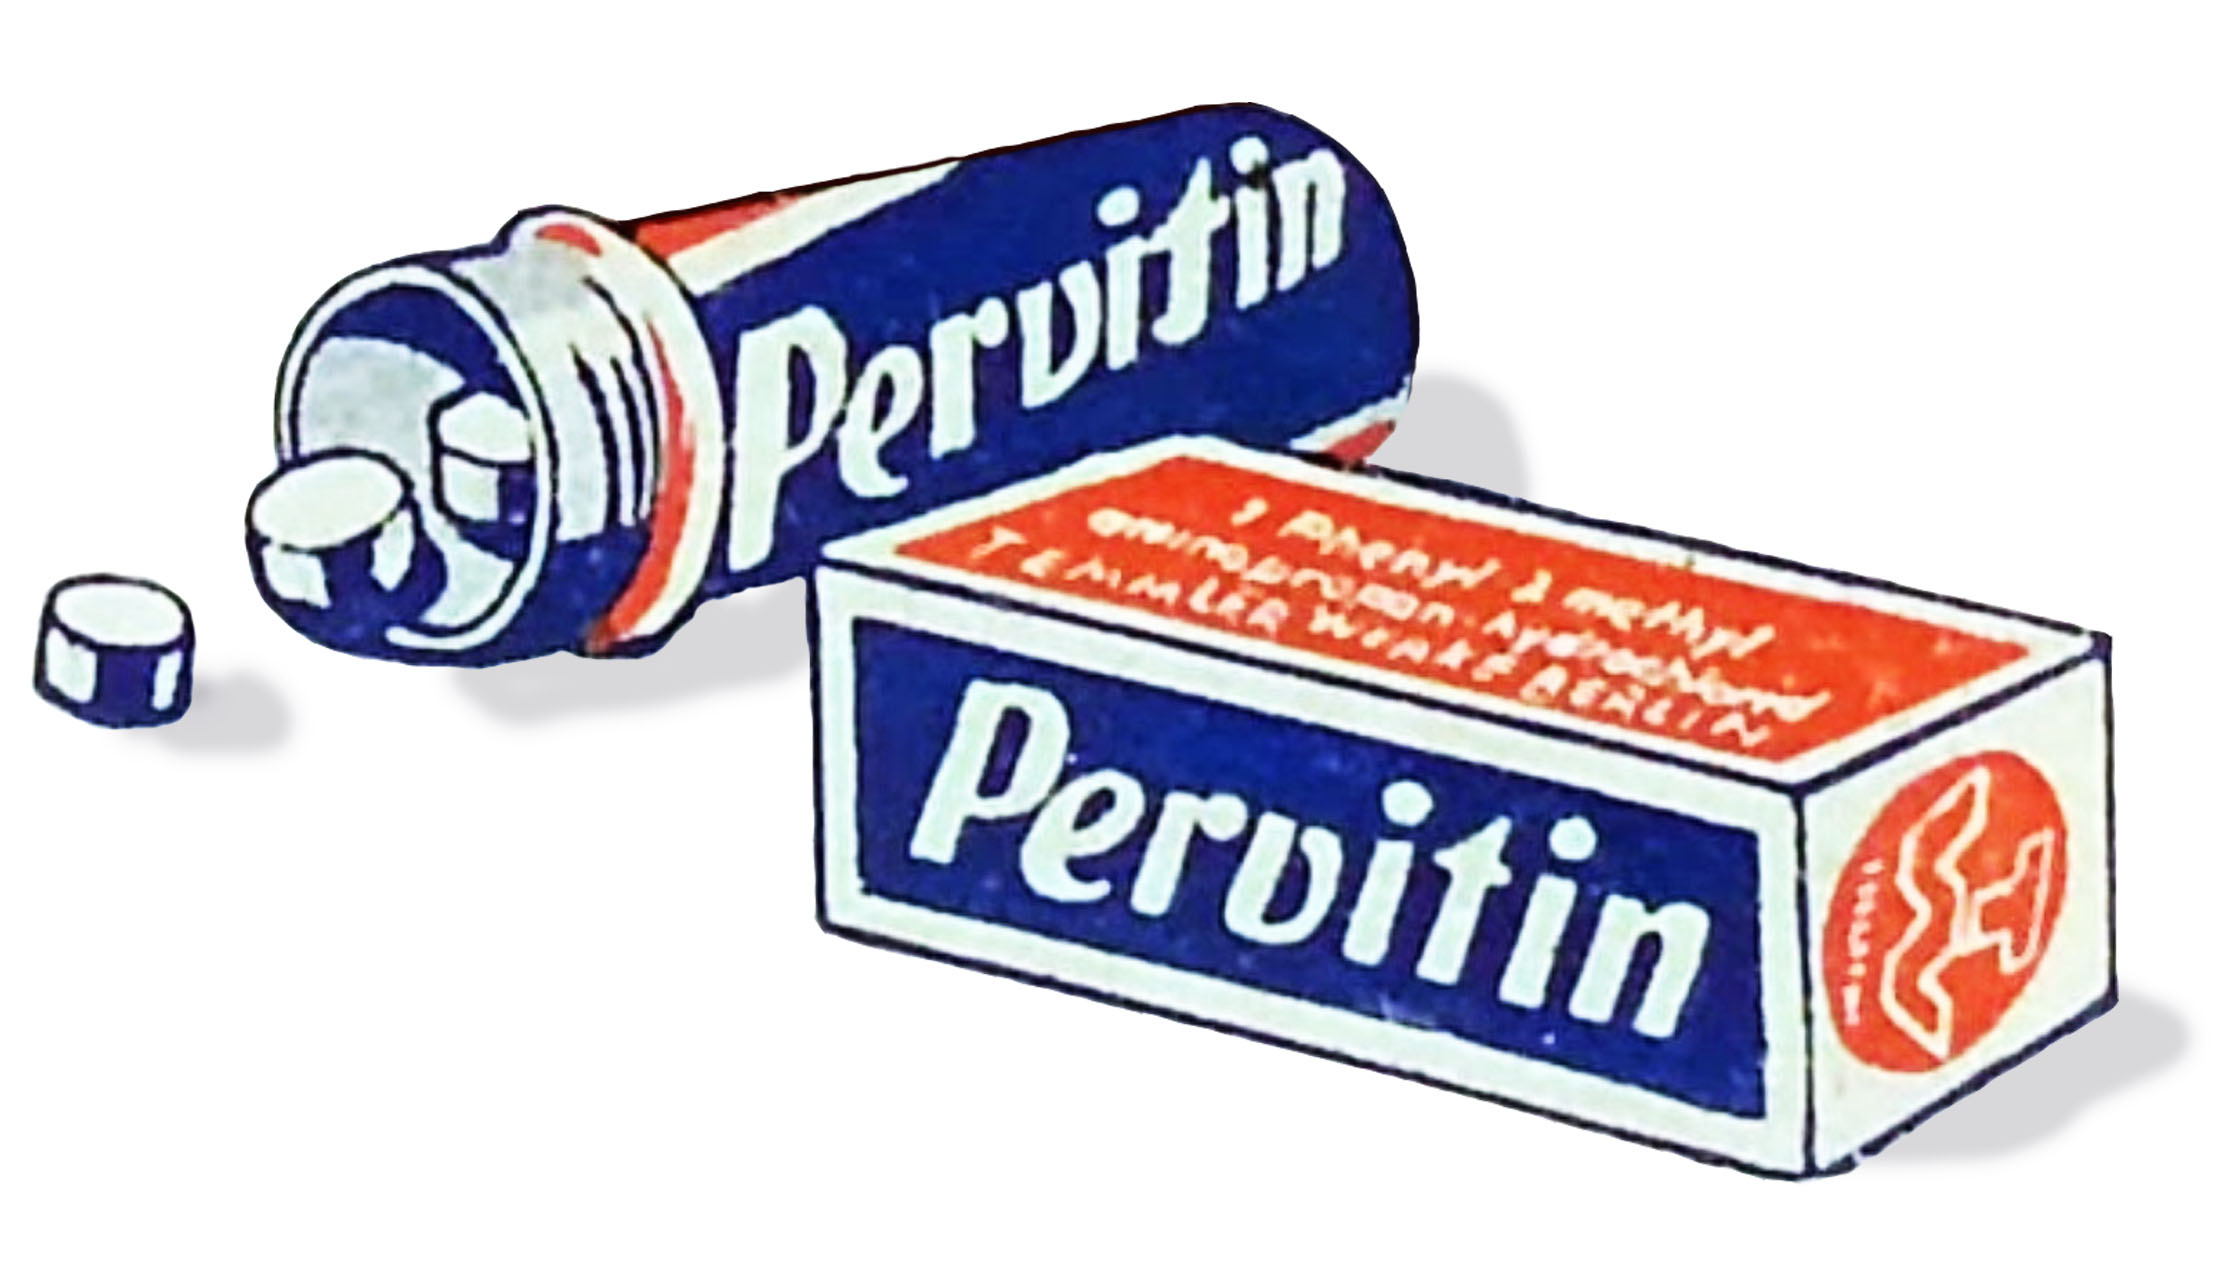 pervitin small package